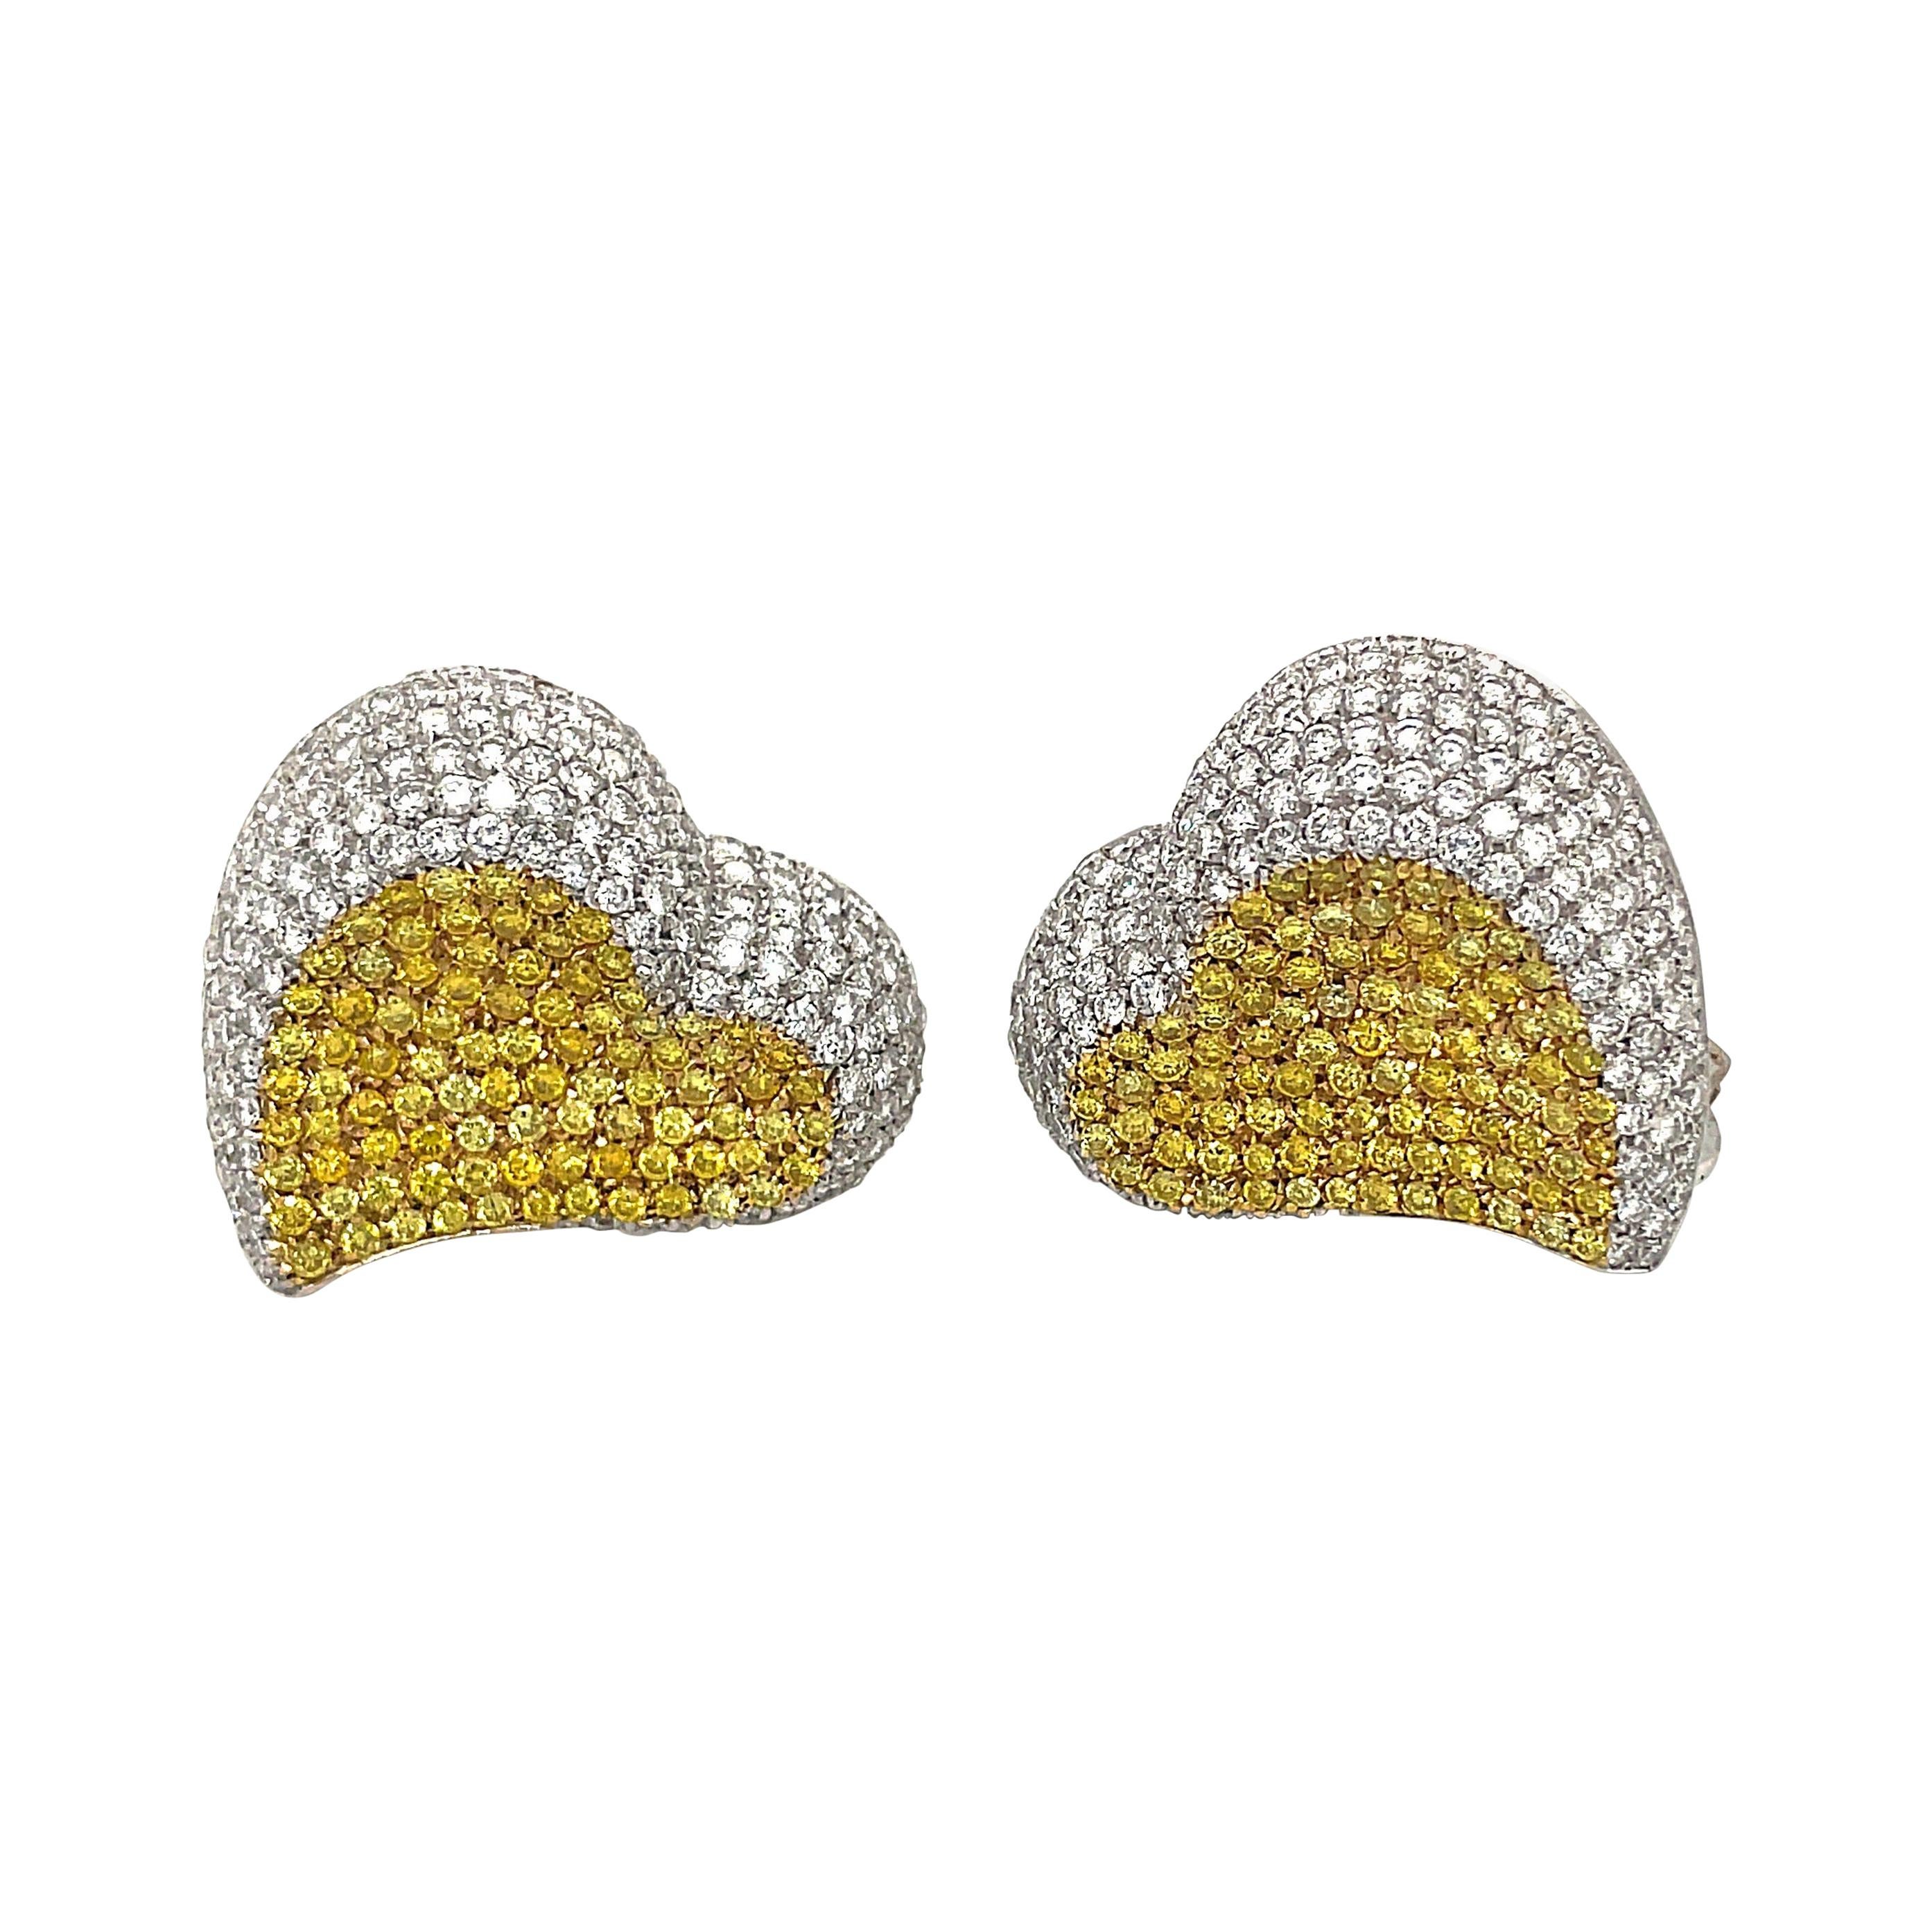 Cellini 6.16ct. Yellow and White Diamond Heart Earrings in 18kt Gold